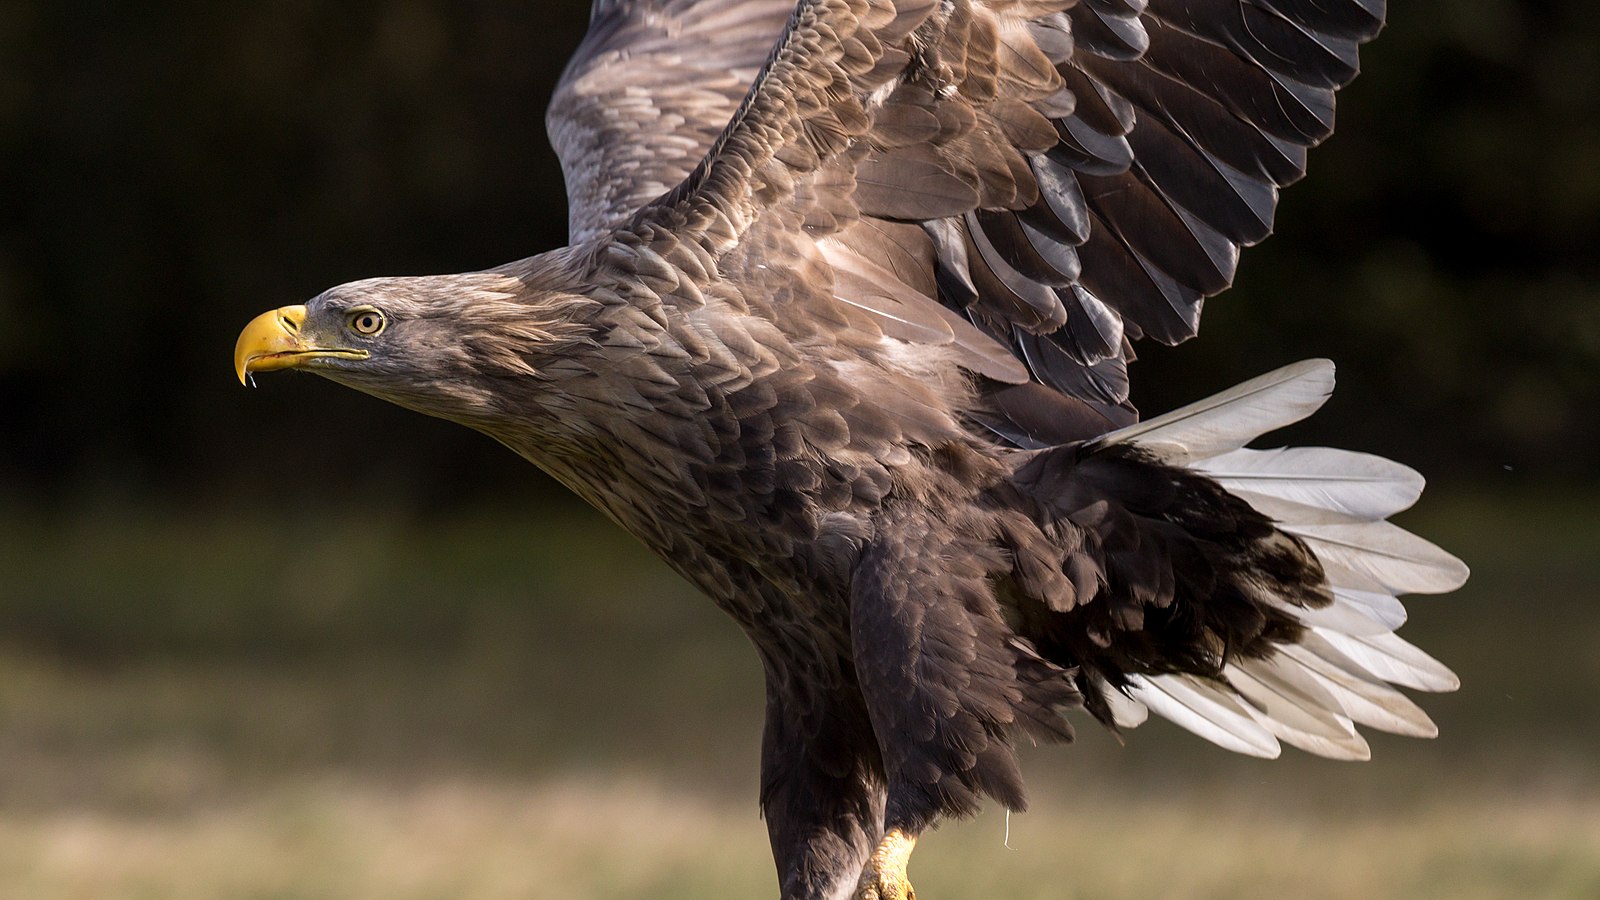 do white tailed eagles have tongues